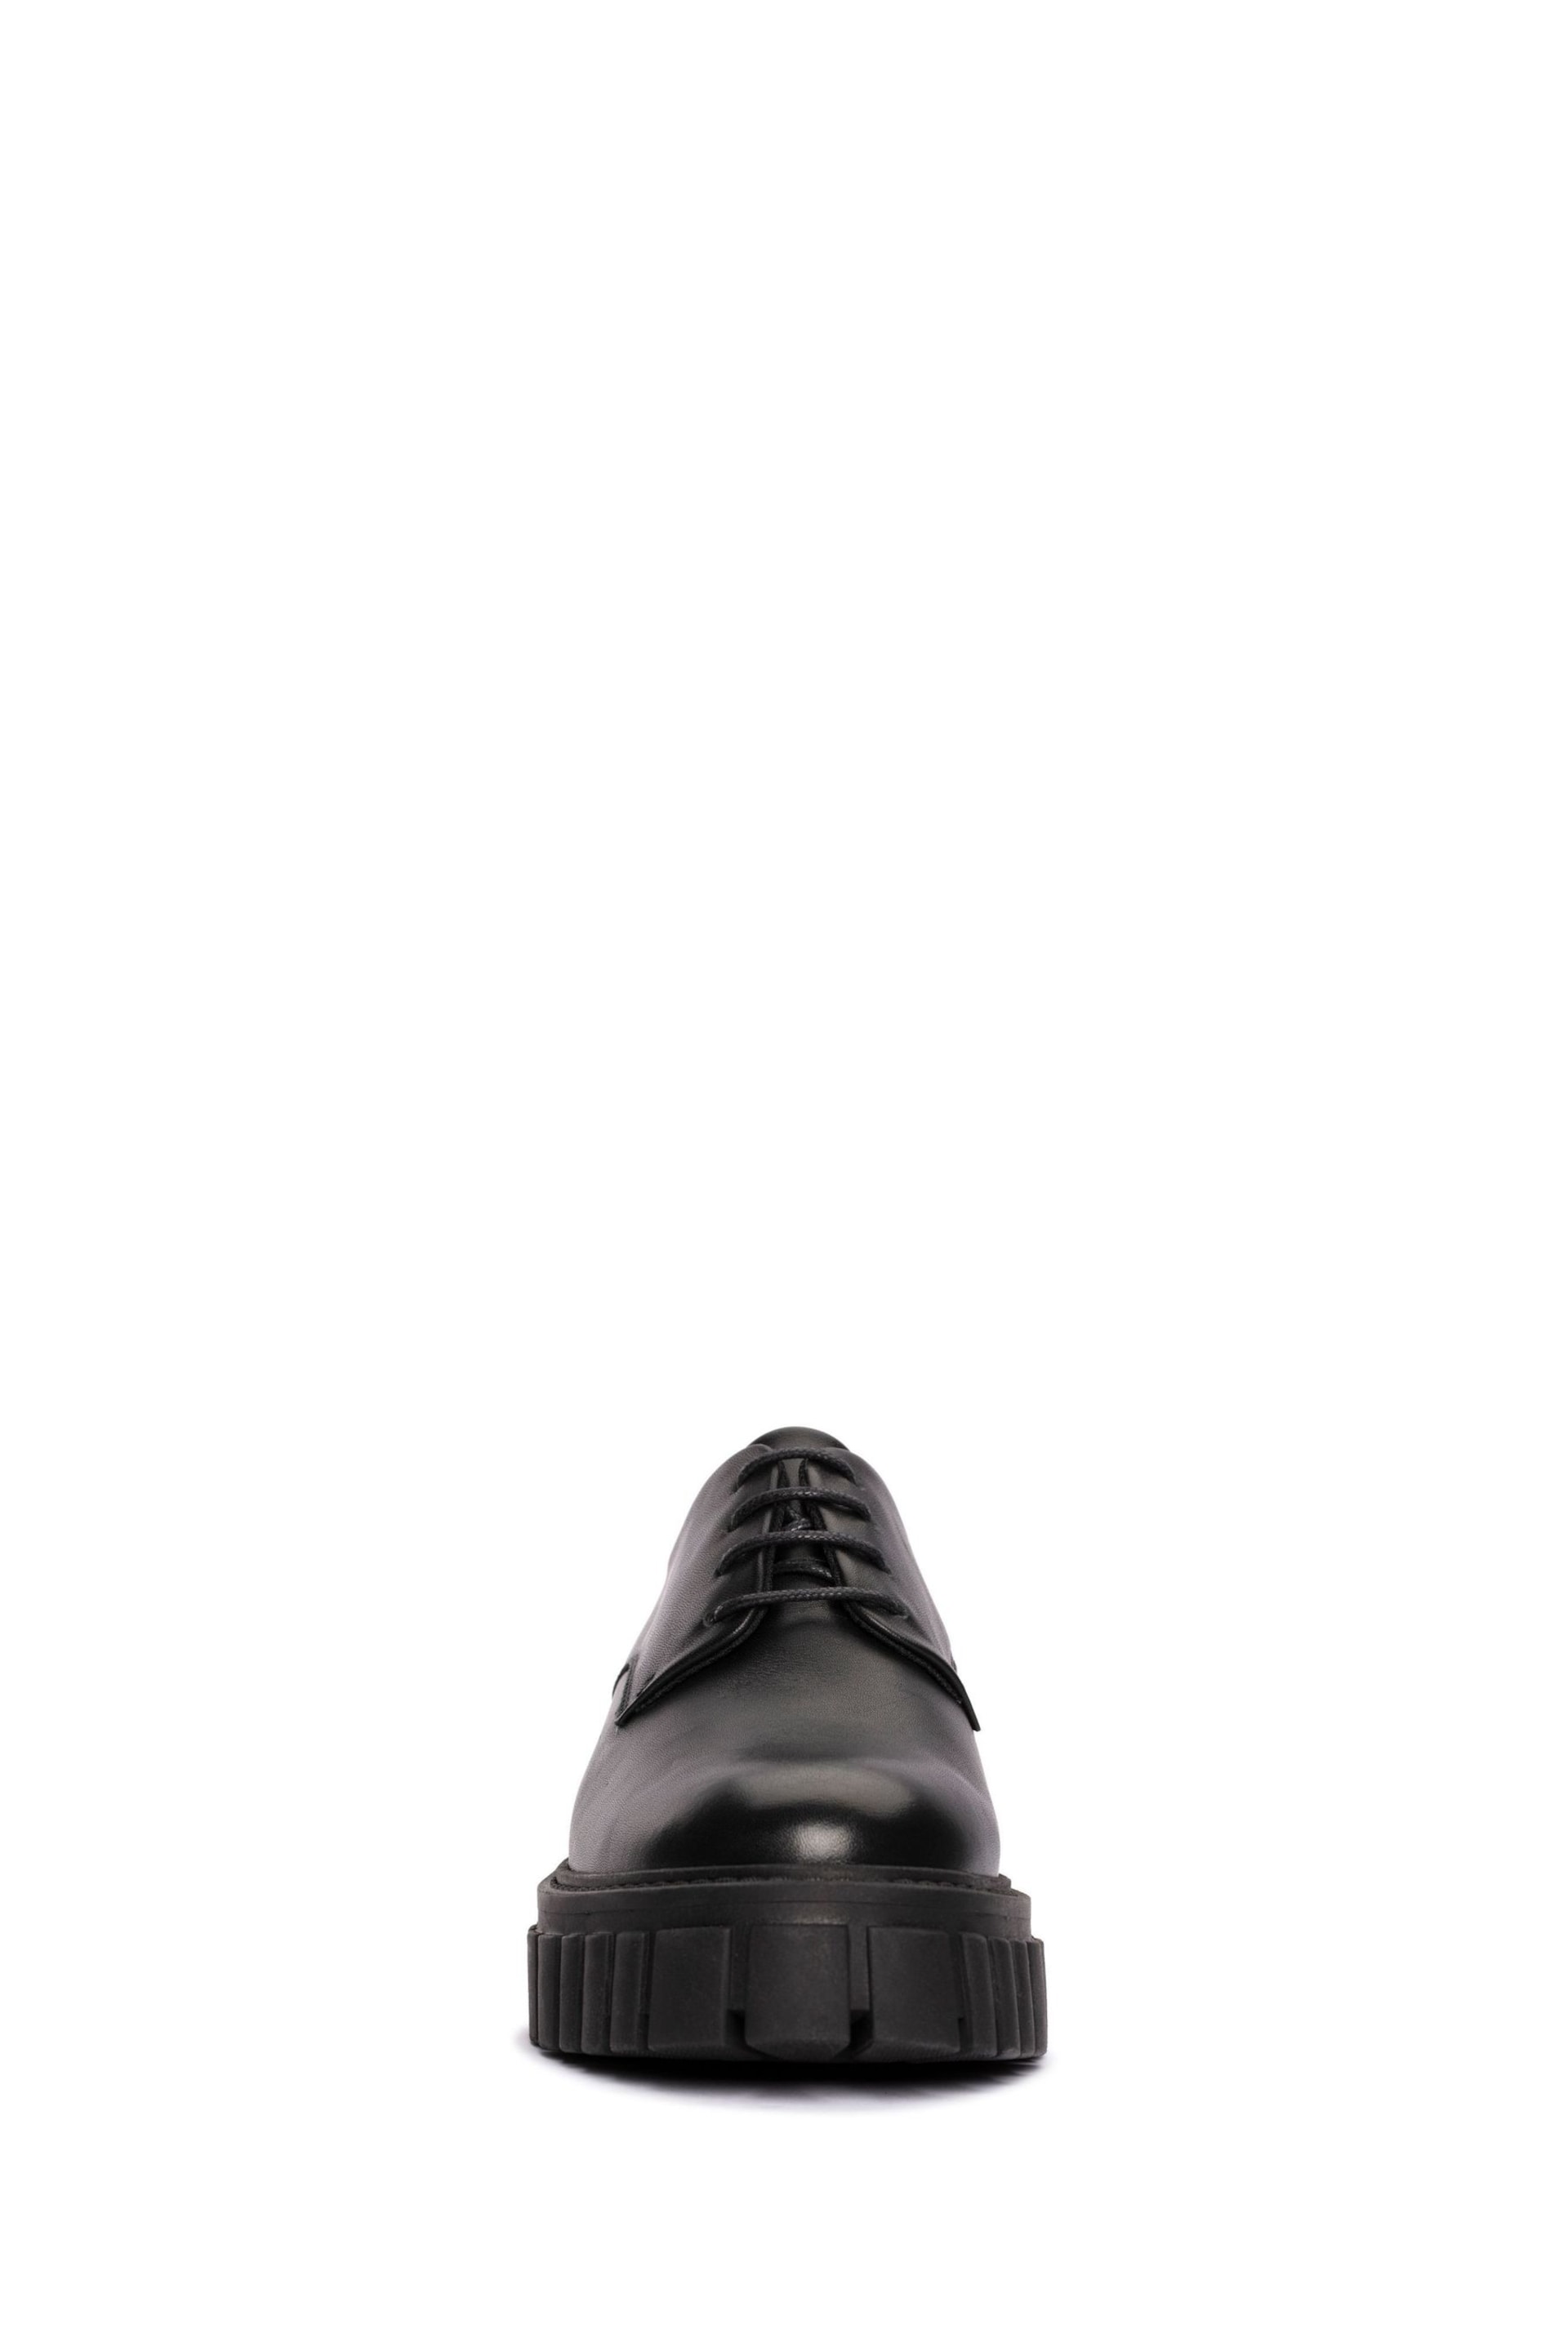 Clarks Black Leather Page Walk Shoes - Image 5 of 7